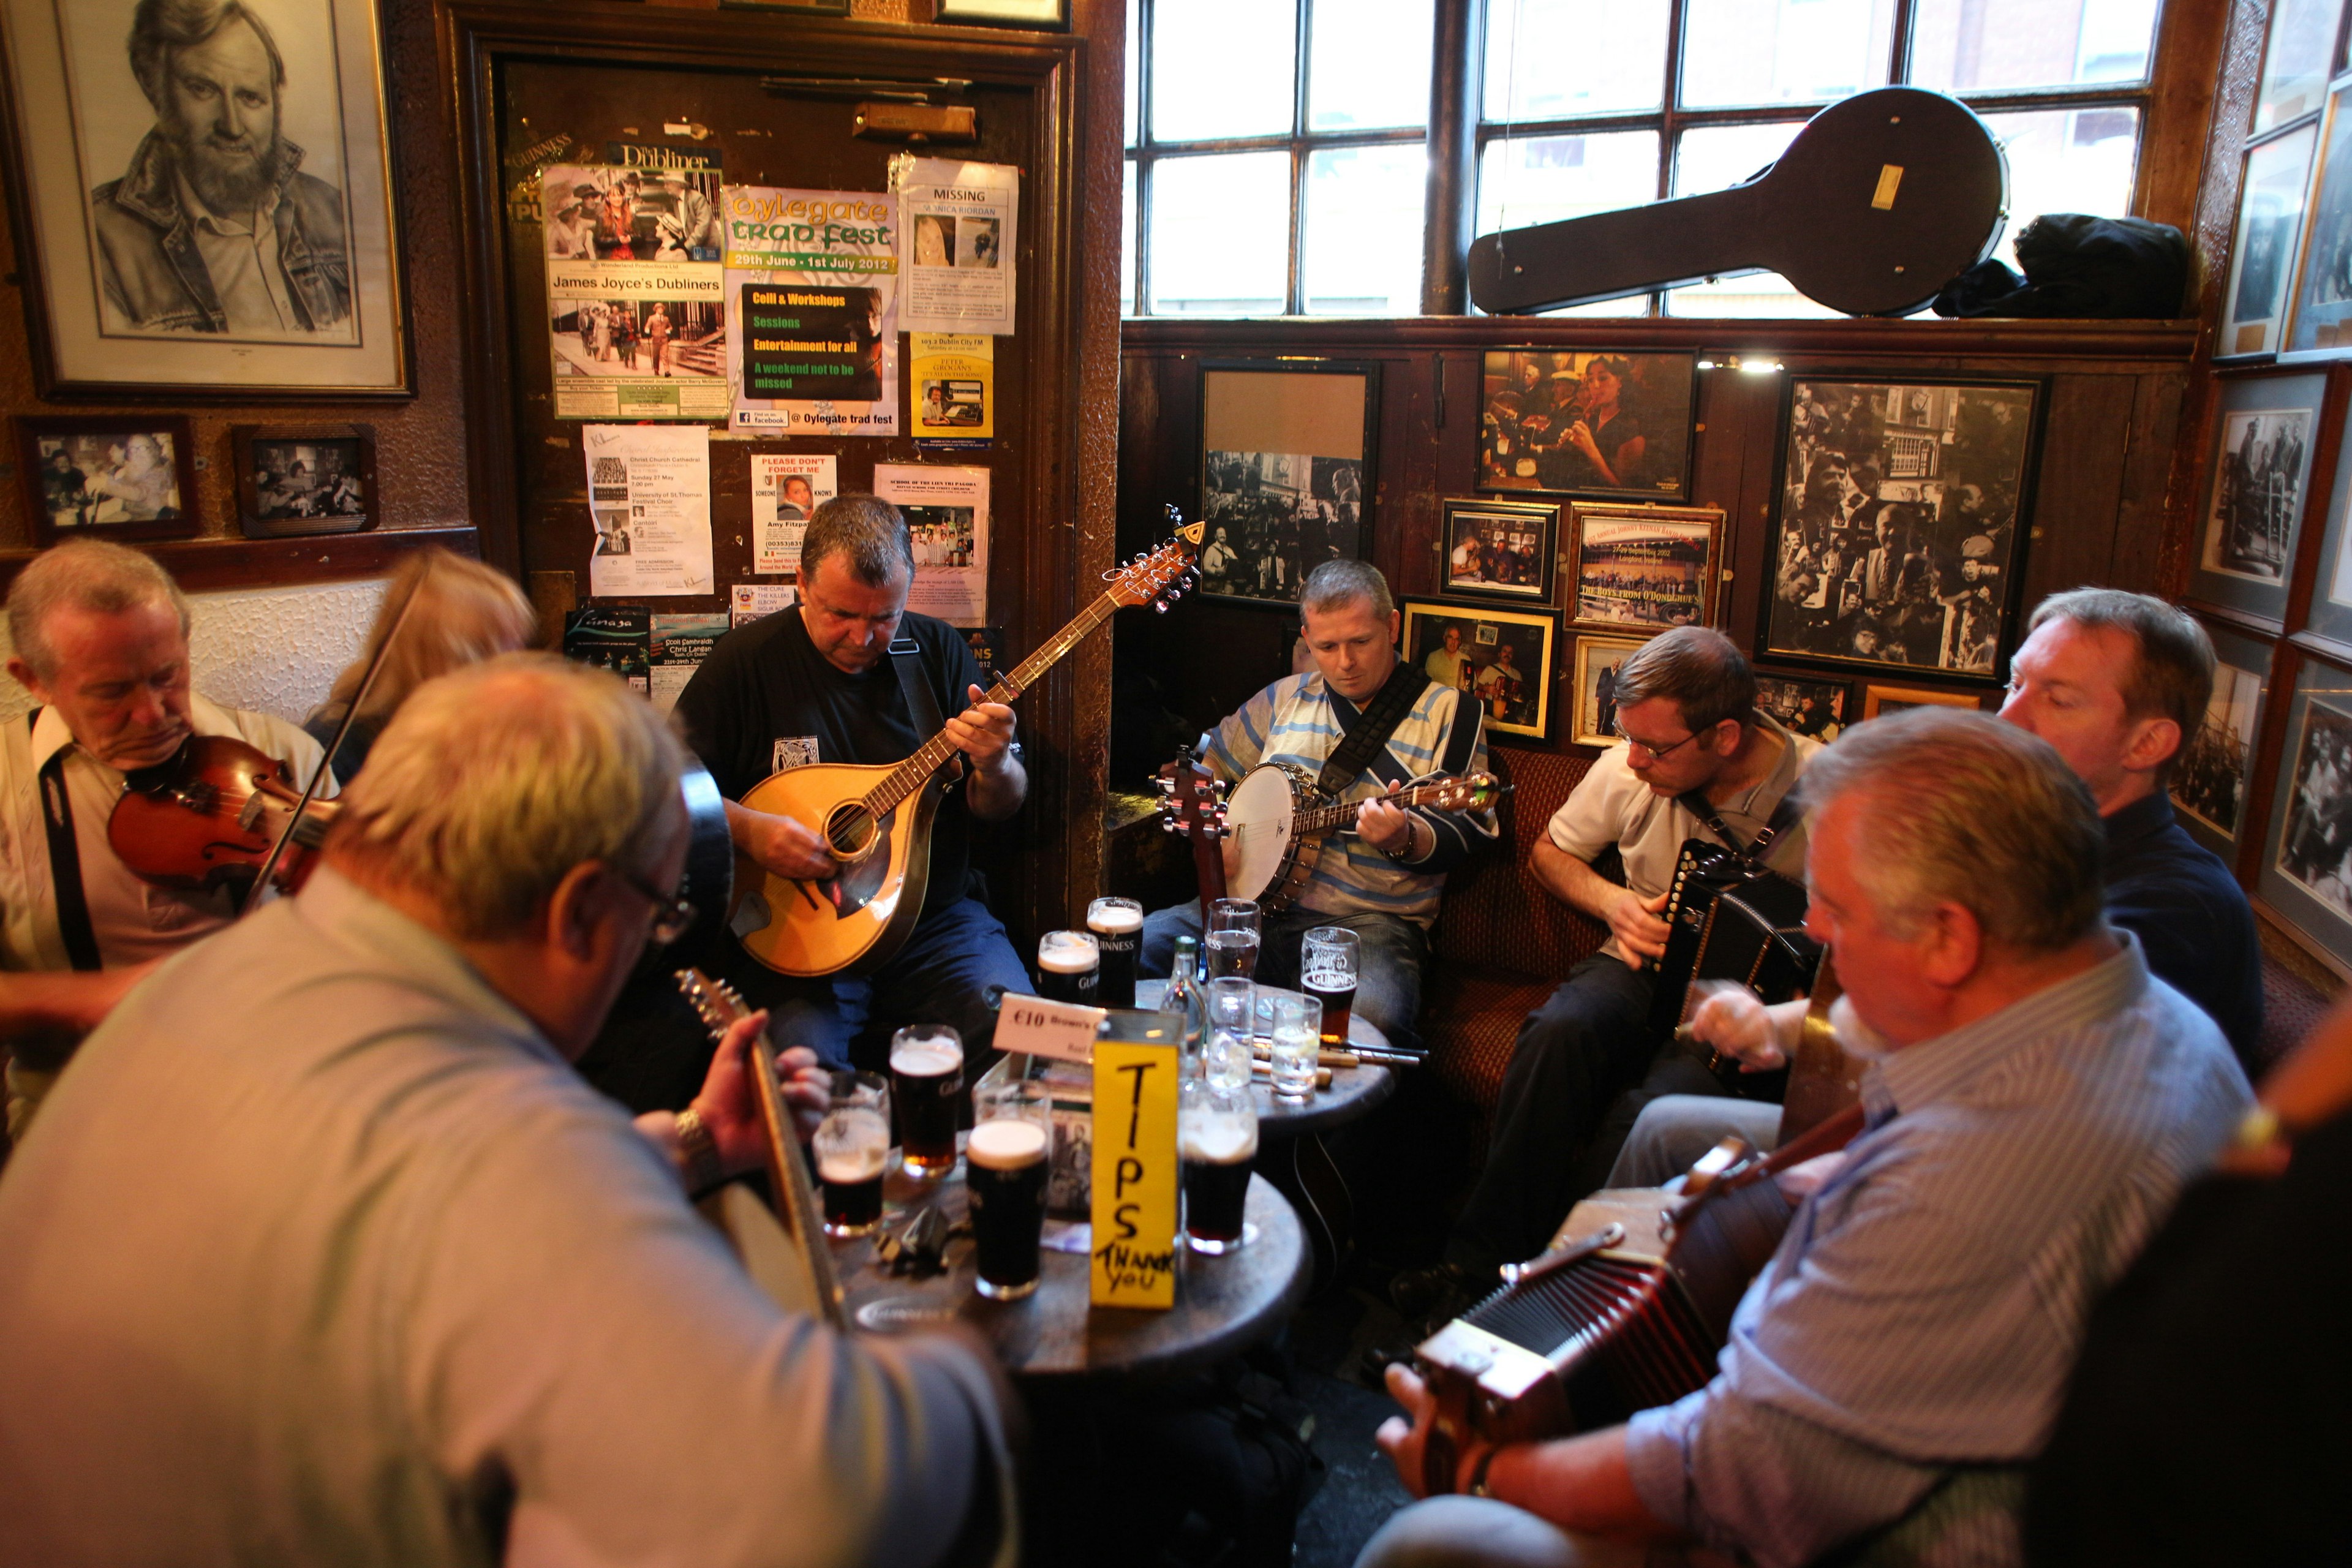 Musician's playing in O'Donoghue's Bar, Dublin, Ireland. O'Donoghue's is known for it's traditional Irish music. It has been frequented of the years by many musicians from the Dubliner's to Bruce Springsteen. O'Donoghue's is recognized as one of Dublin's most famous pubs and is frequented by locals and tourist alike to play a tune or enjoy a pint of Guinness. Dublin, Ireland. Photo Tim Clayton (Photo by Tim Clayton/Corbis via Getty Images)